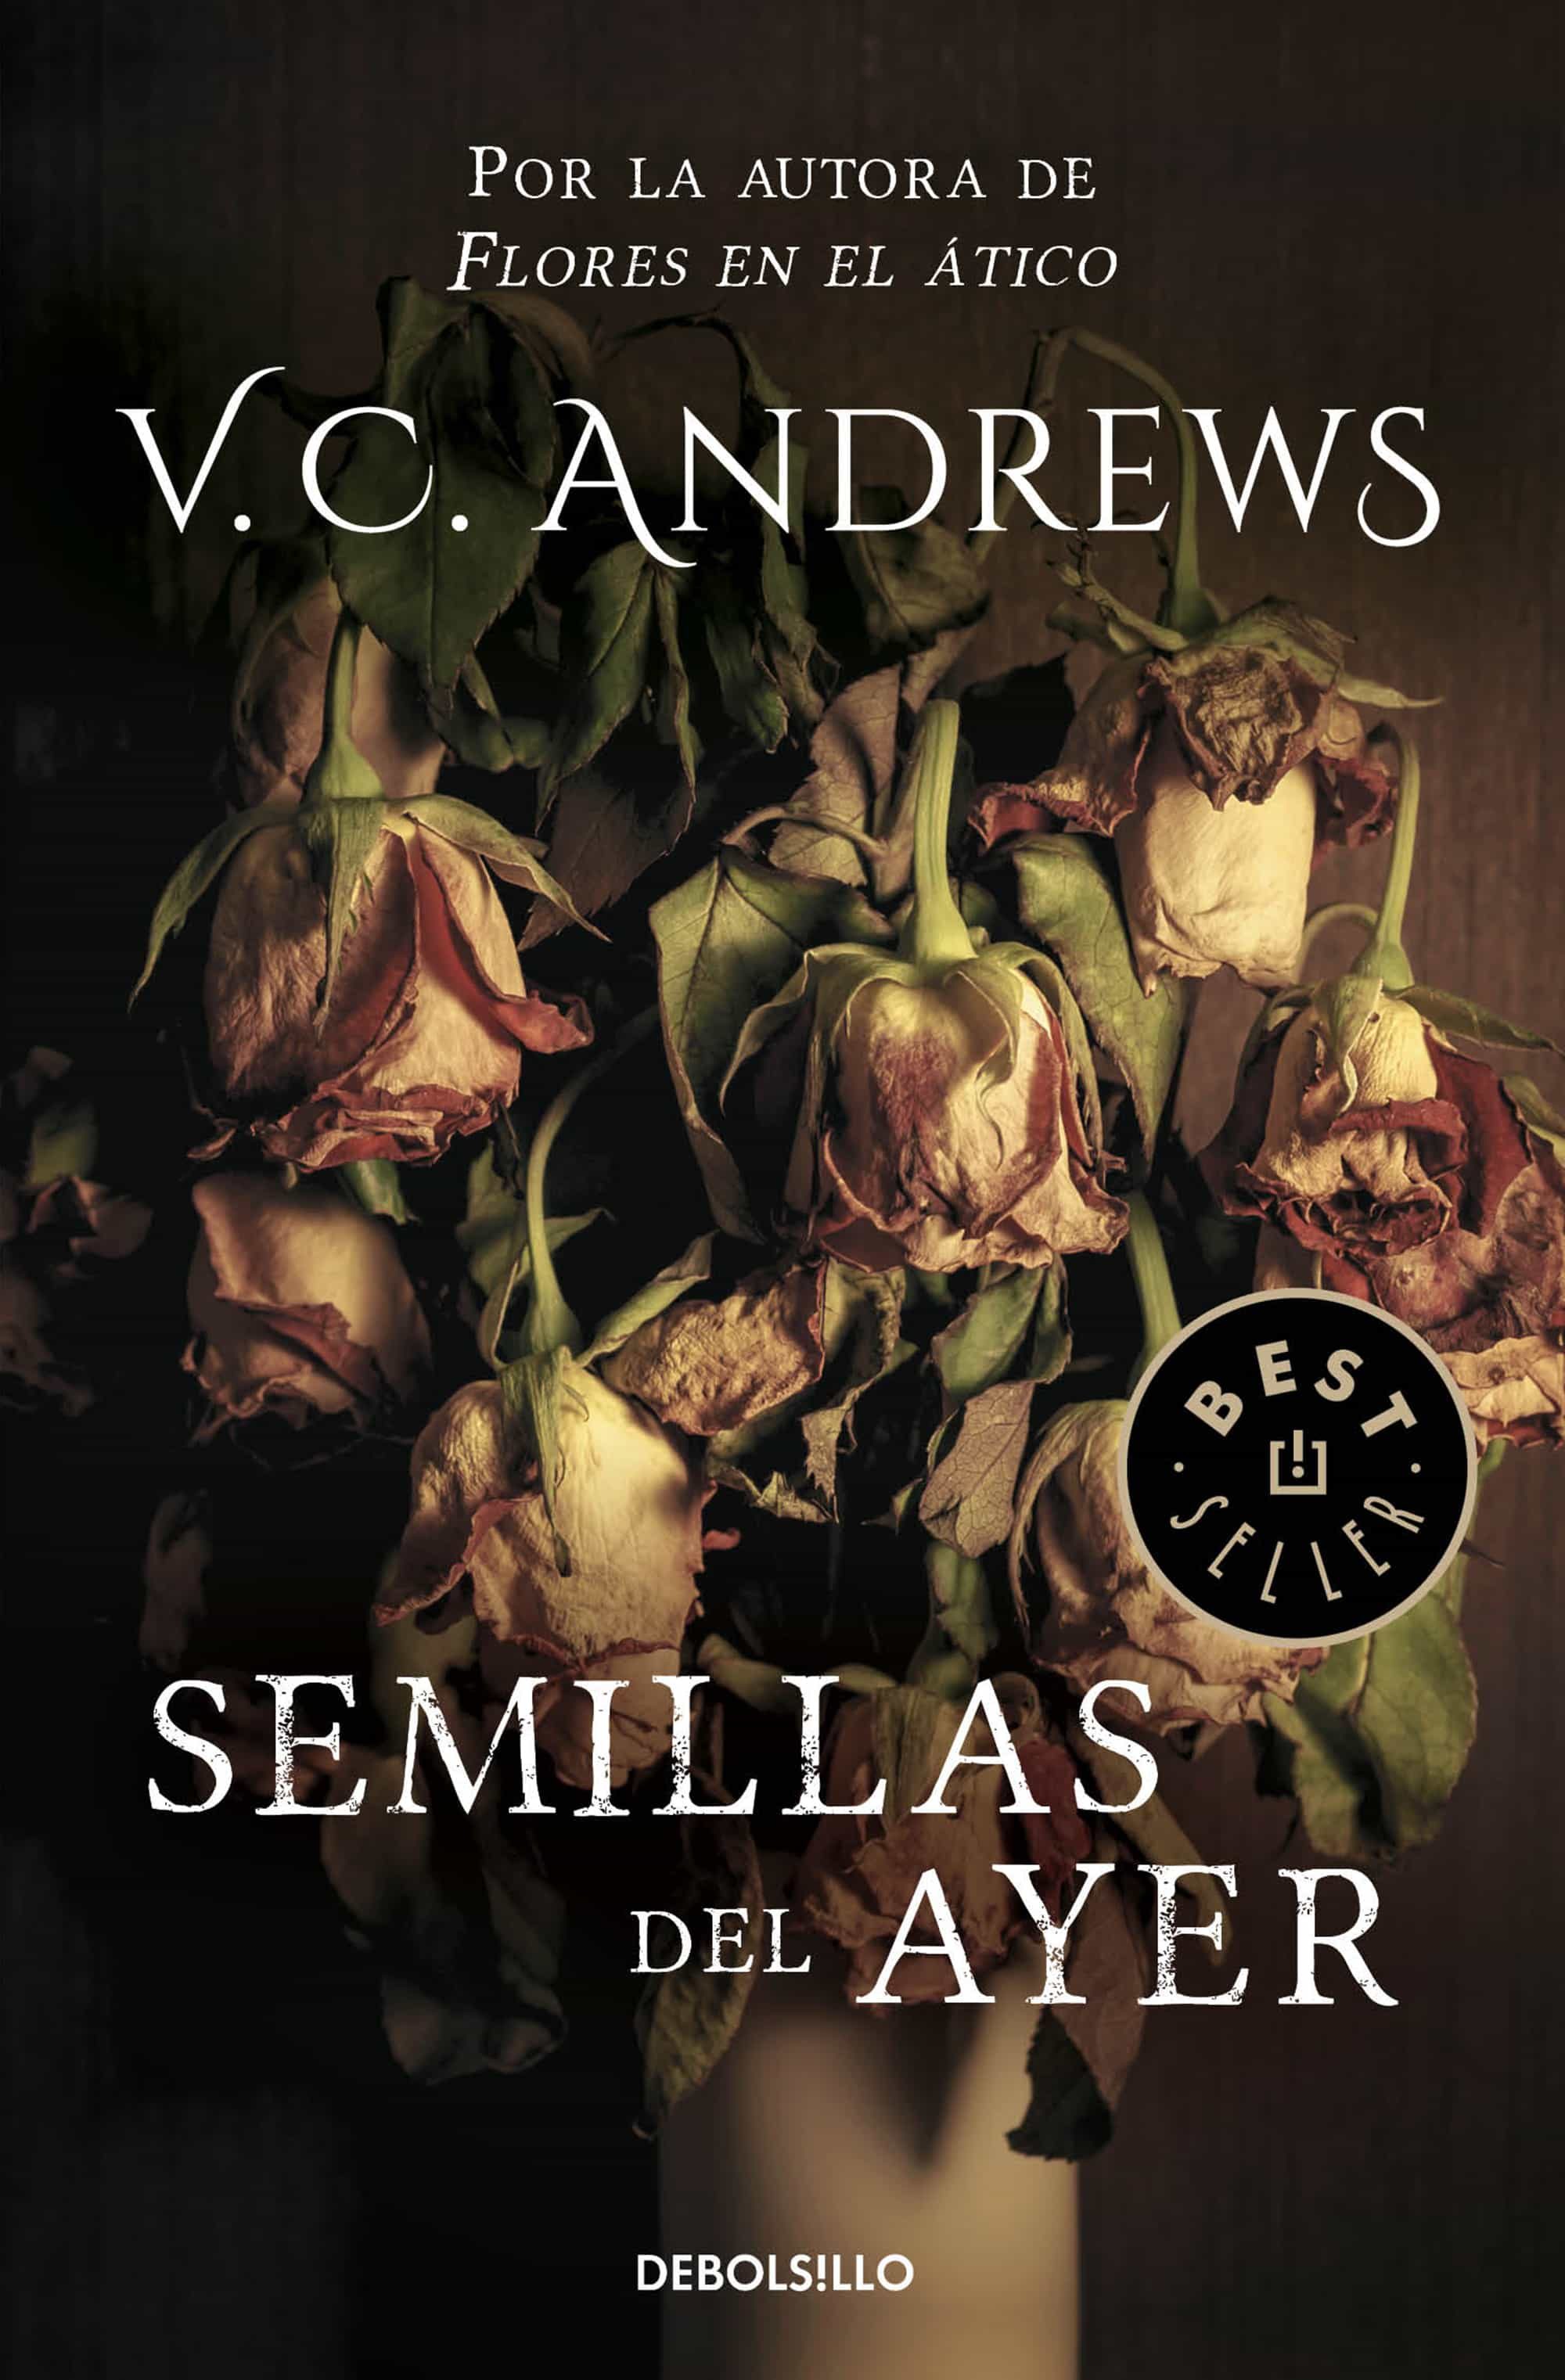 flowers in the attic epub free download